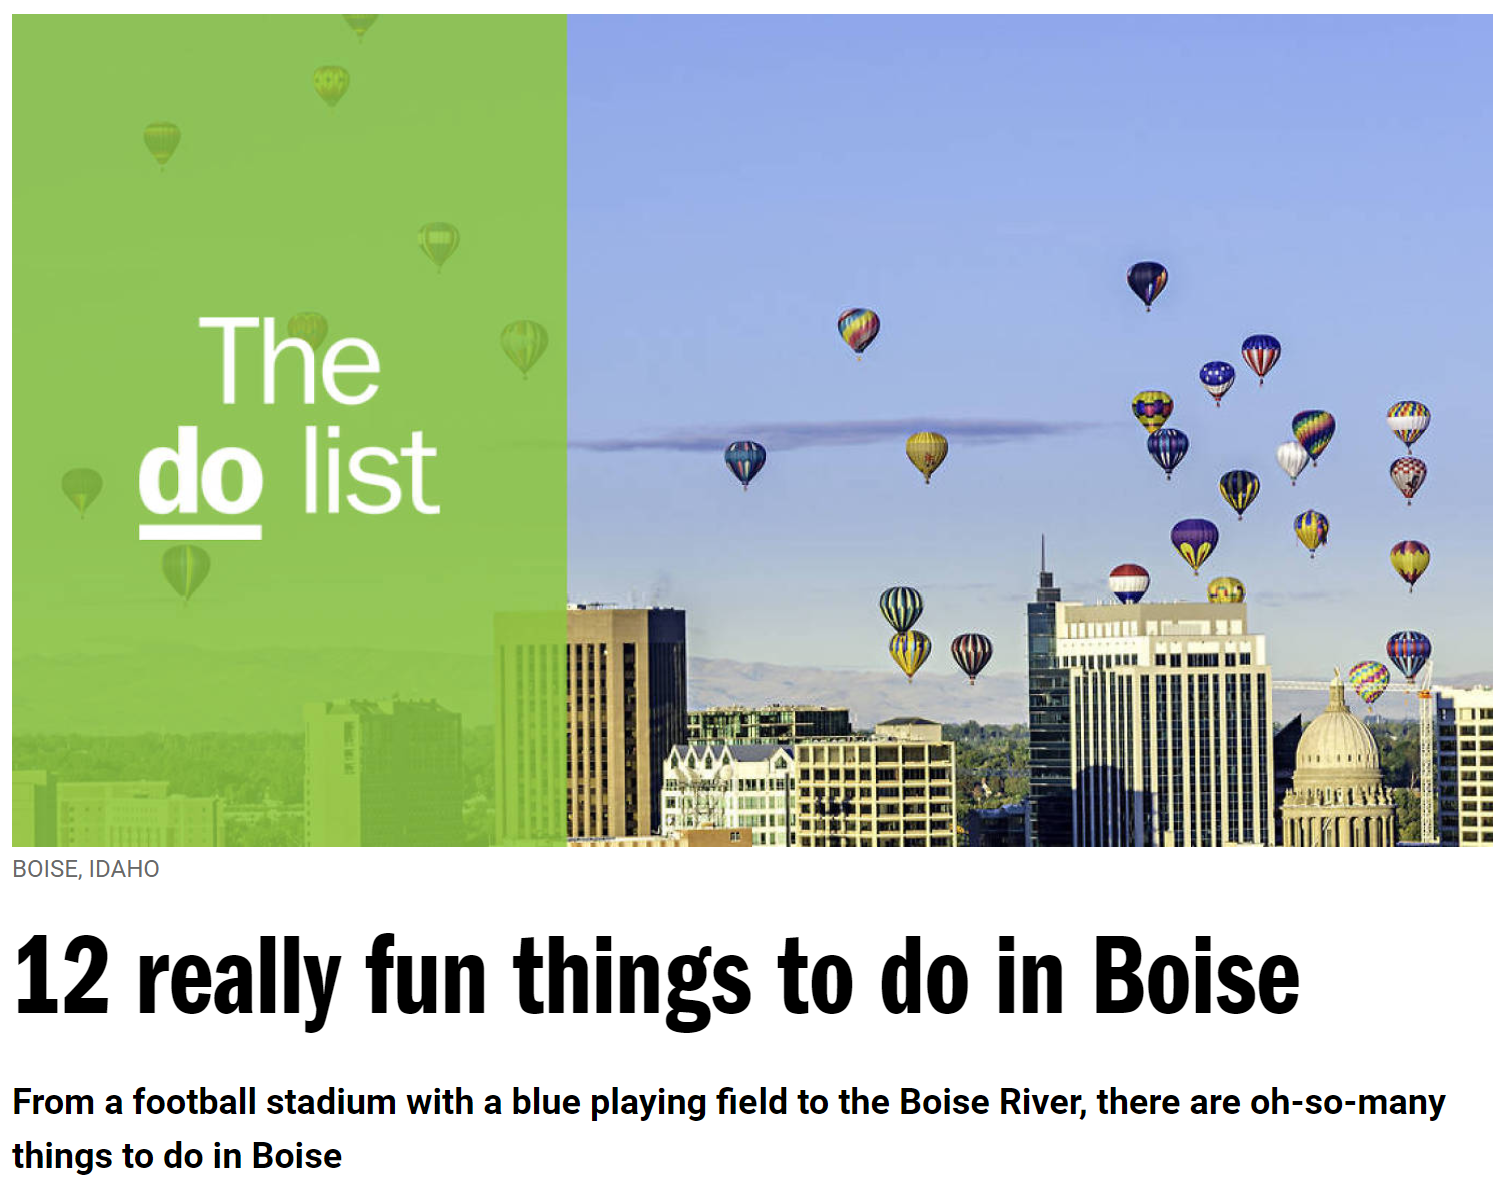 12 fun things to do in Boise